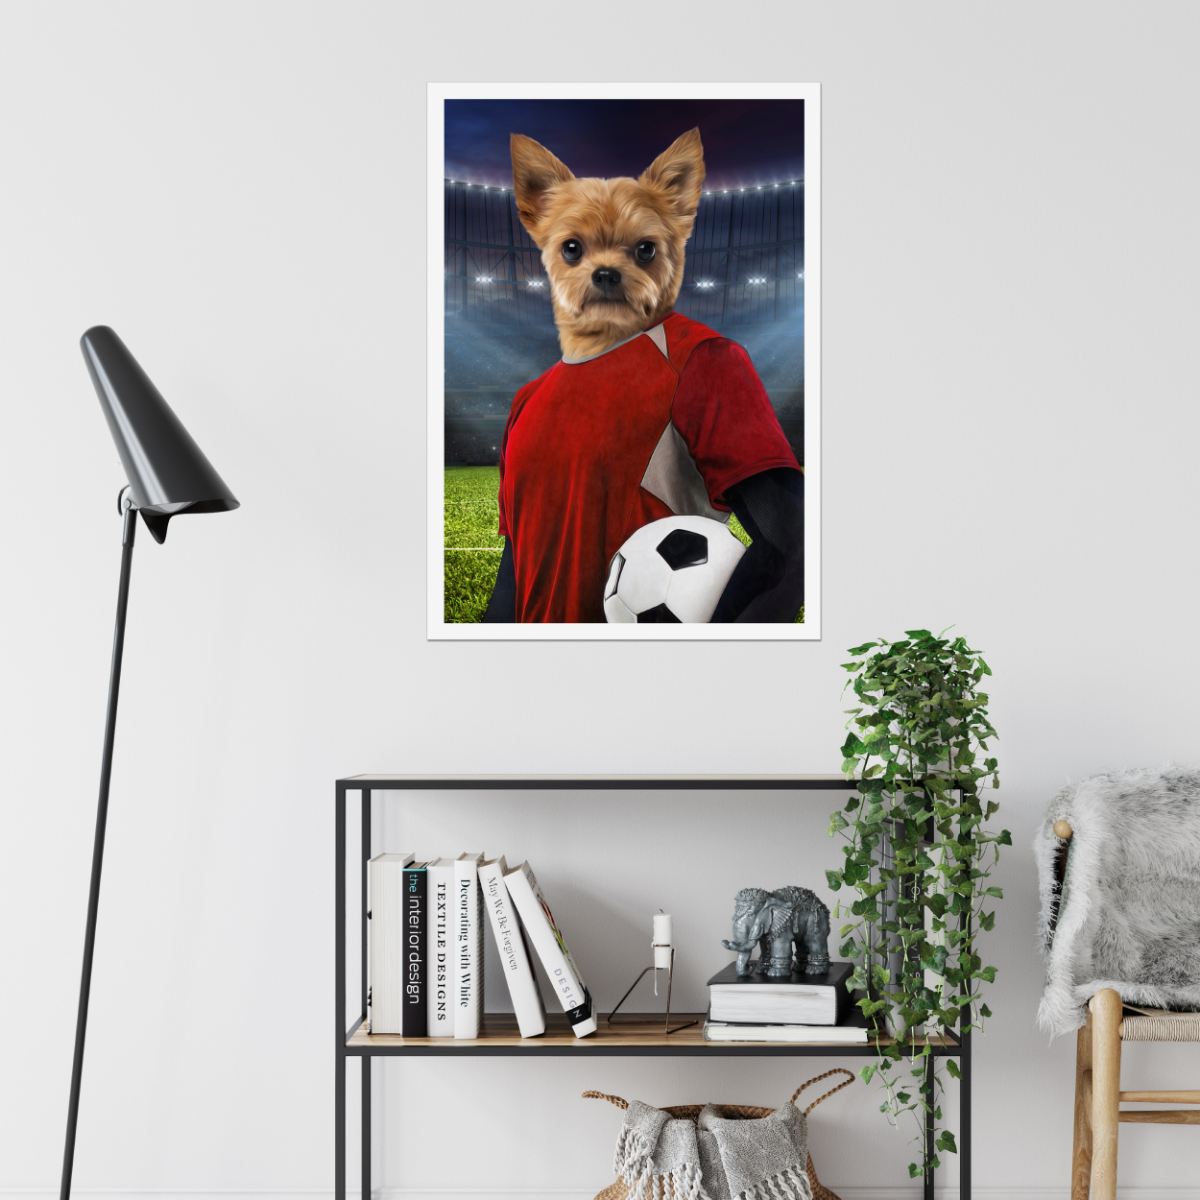 The Football Player: Custom Pet Poster - Paw & Glory - #pet portraits# - #dog portraits# - #pet portraits uk#Paw & Glory, paw and glory, astronaut dog photo pet portraits artists near me old paintings of dogs pet portrait artist uk, funny custom dog portraits mimi vang olsen pet portraits pet portraits